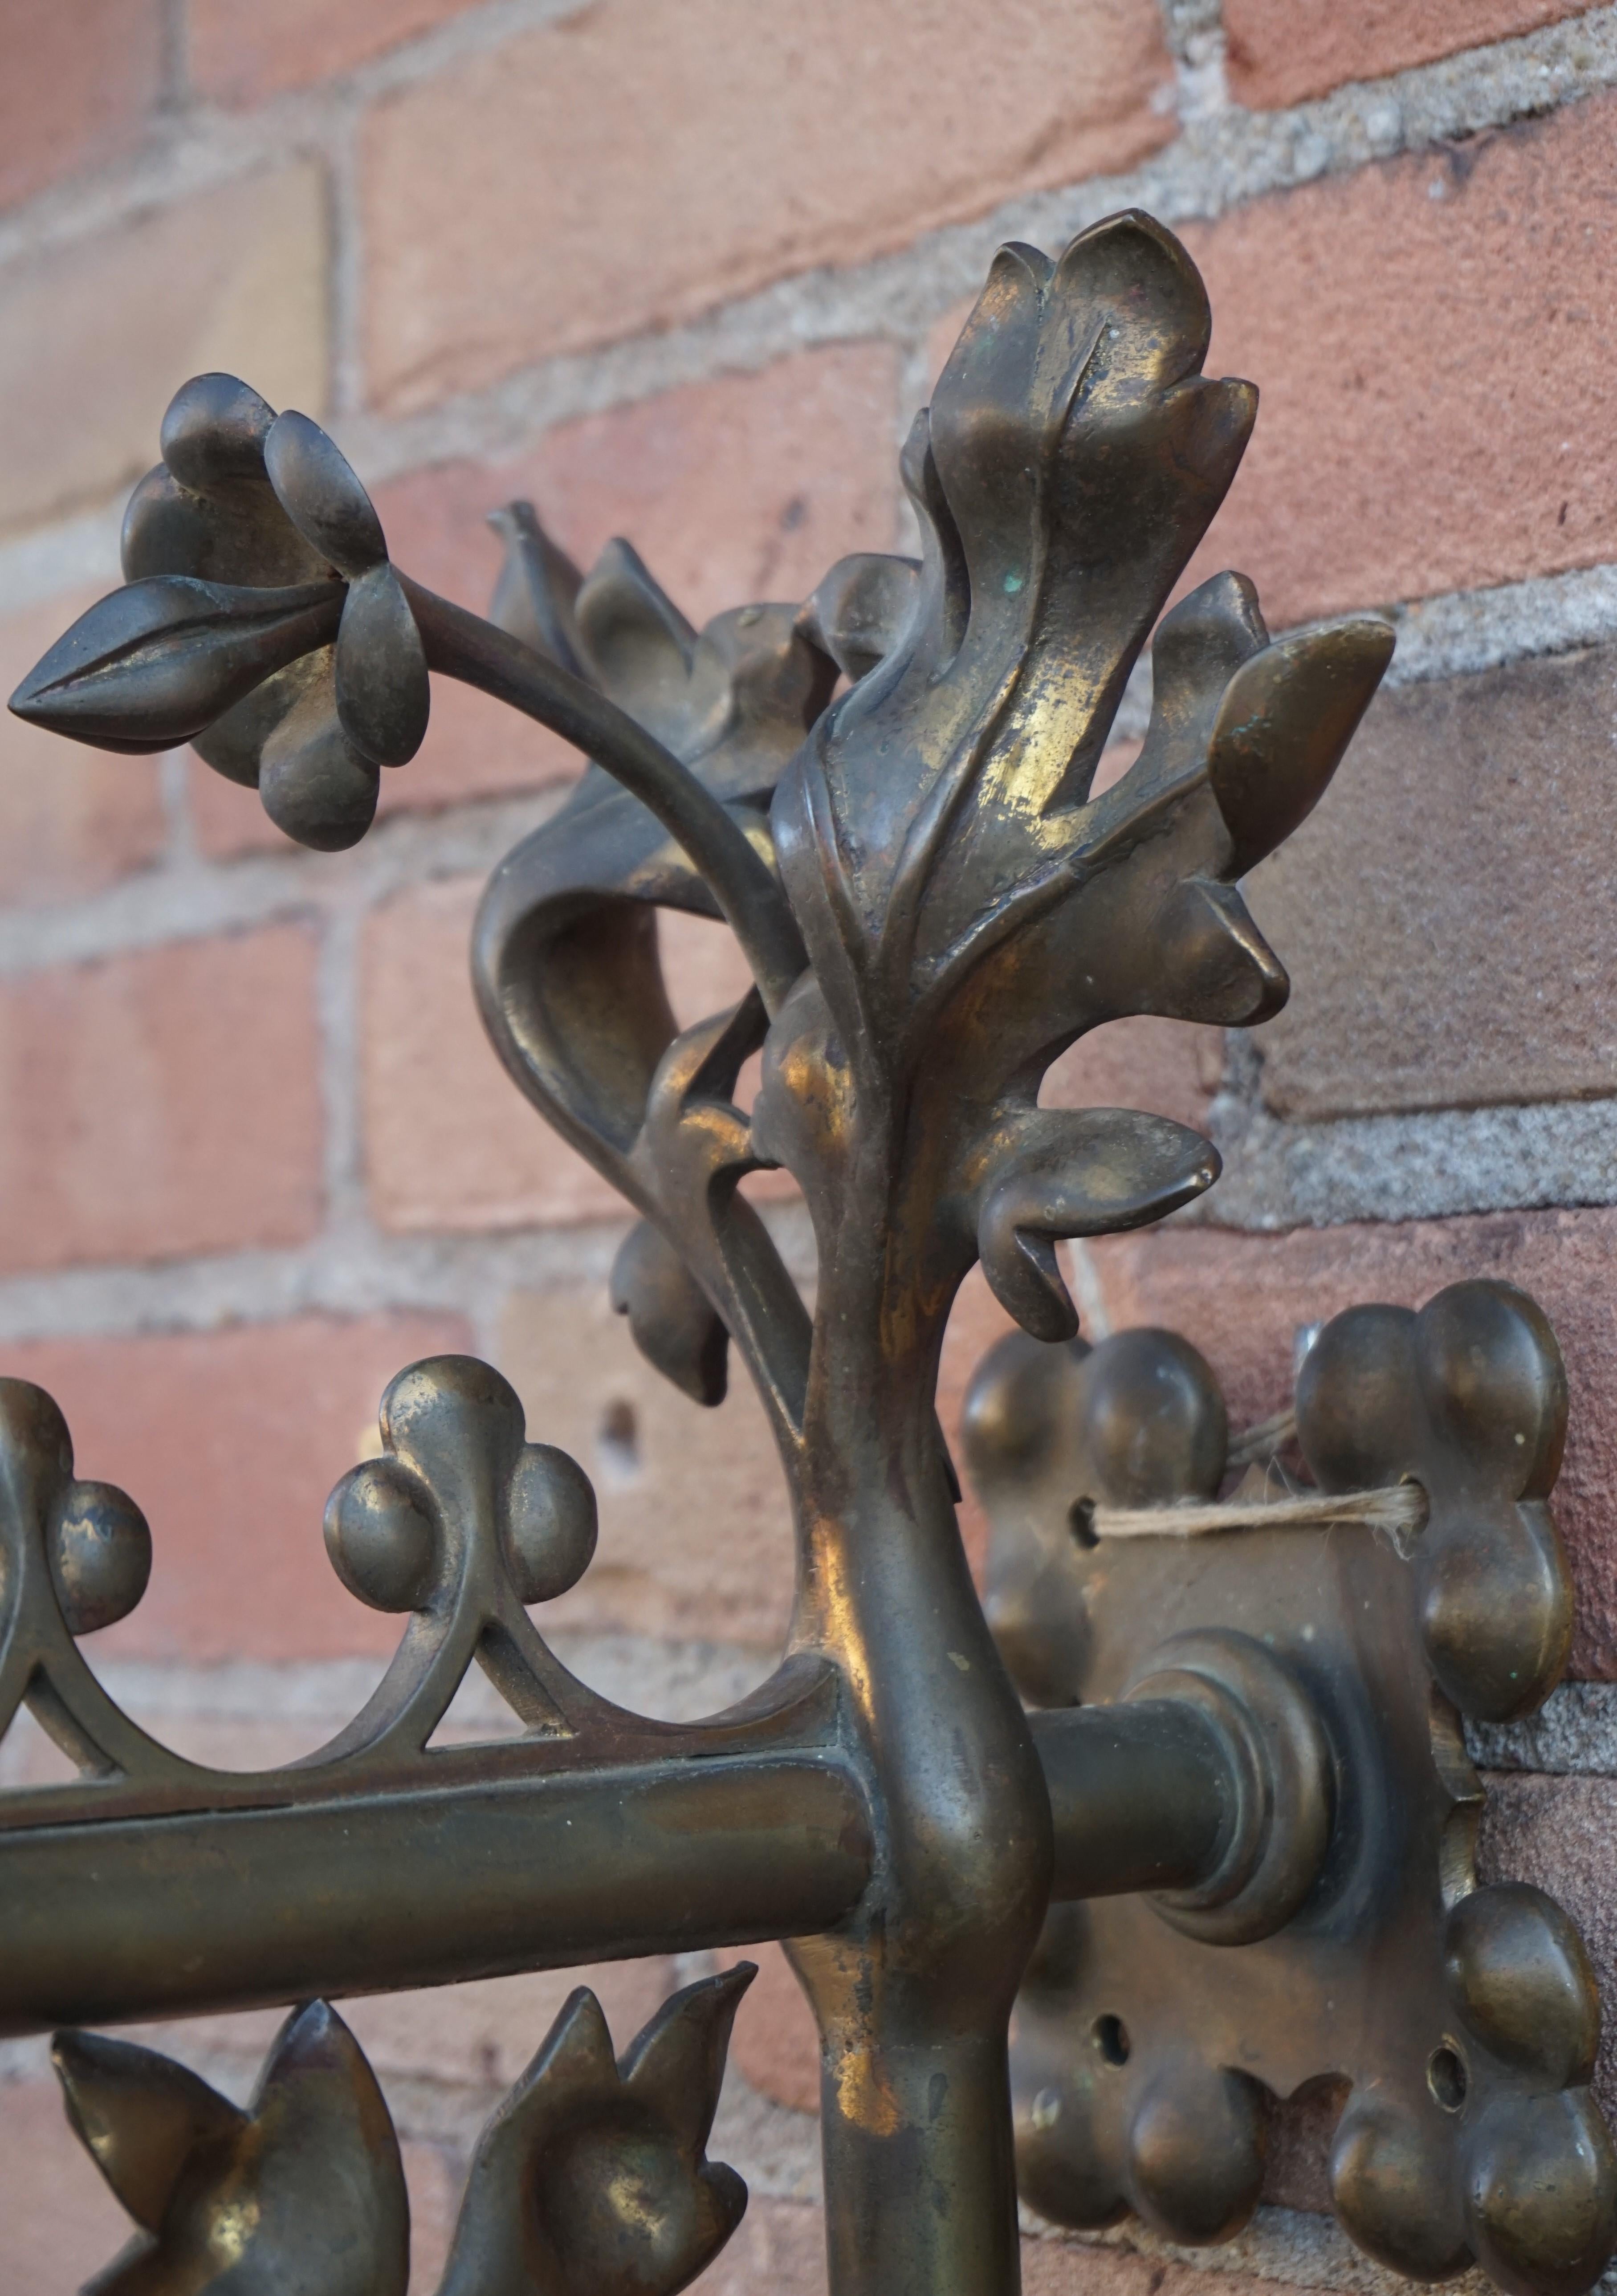 19th Century Large Gothic Revival Bronze & Brass Wall Candelabra/Candle Sconce with Gargoyle